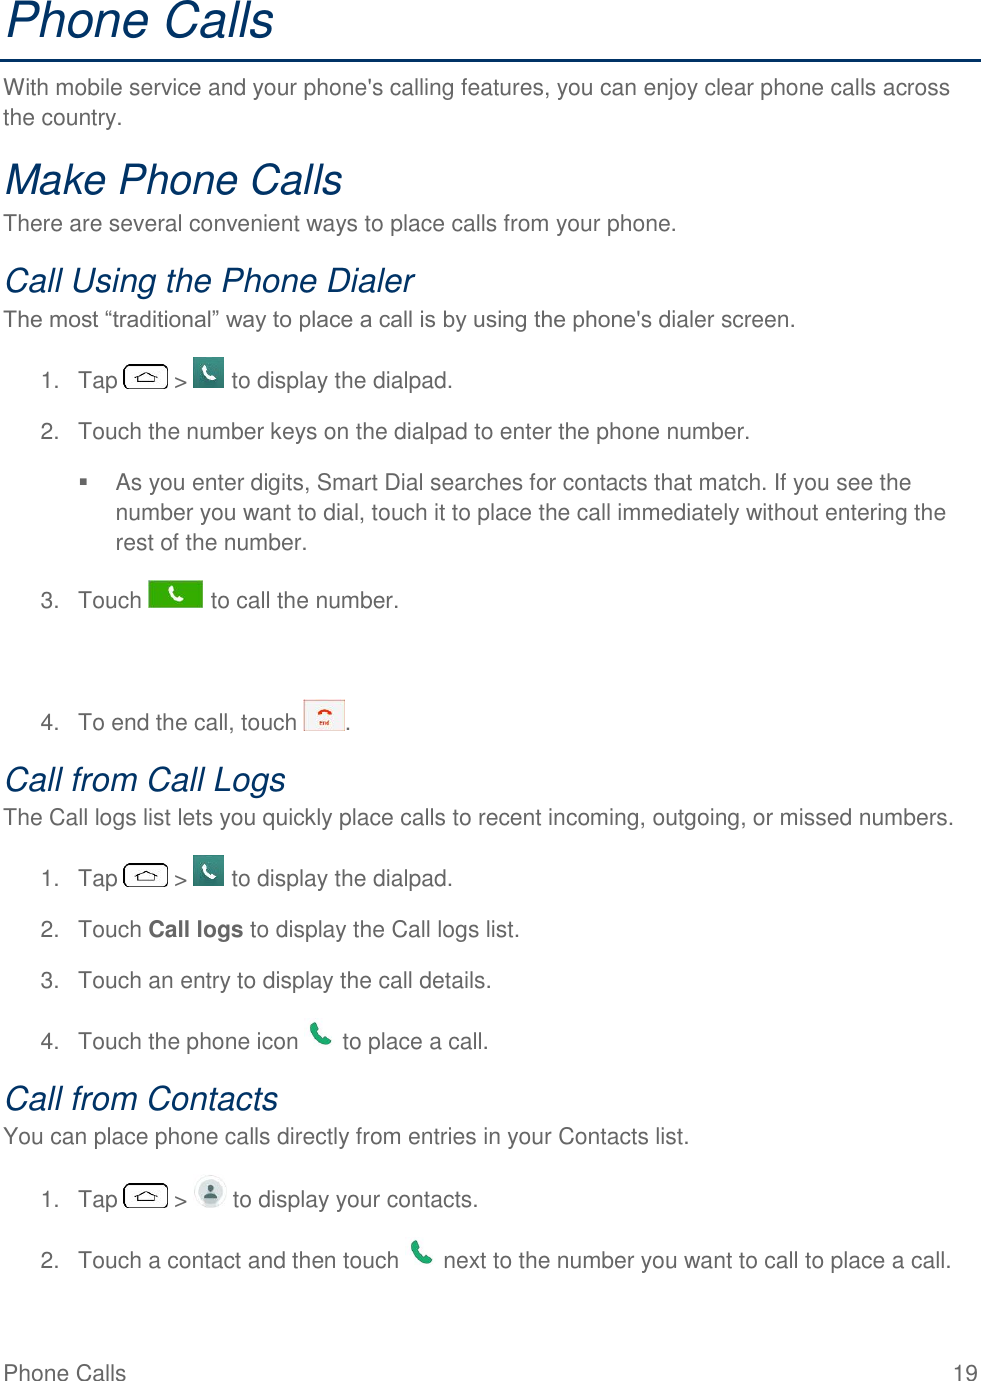 Phone Calls  19 Phone Calls With mobile service and your phone&apos;s calling features, you can enjoy clear phone calls across the country. Make Phone Calls There are several convenient ways to place calls from your phone. Call Using the Phone Dialer The most ―traditional‖ way to place a call is by using the phone&apos;s dialer screen.  1.  Tap   &gt;   to display the dialpad. 2.  Touch the number keys on the dialpad to enter the phone number.   As you enter digits, Smart Dial searches for contacts that match. If you see the number you want to dial, touch it to place the call immediately without entering the rest of the number. 3.  Touch   to call the number.   4.  To end the call, touch  . Call from Call Logs The Call logs list lets you quickly place calls to recent incoming, outgoing, or missed numbers. 1.  Tap   &gt;   to display the dialpad. 2.  Touch Call logs to display the Call logs list. 3.  Touch an entry to display the call details. 4.  Touch the phone icon   to place a call. Call from Contacts You can place phone calls directly from entries in your Contacts list. 1.  Tap   &gt;   to display your contacts. 2.  Touch a contact and then touch   next to the number you want to call to place a call. 